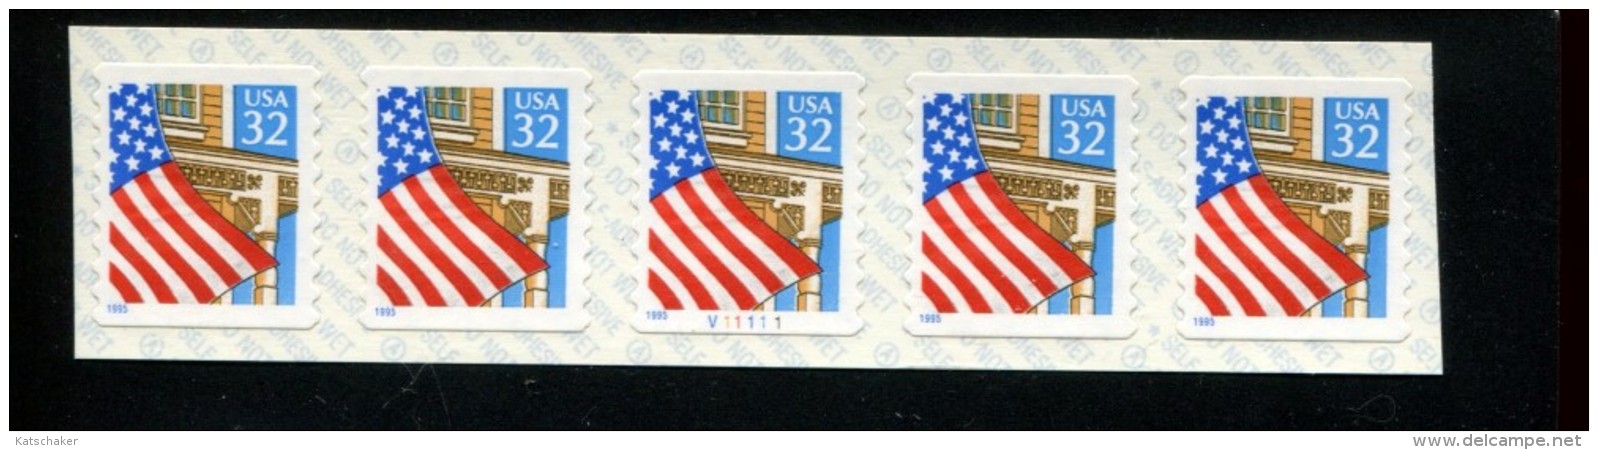 397857695 1995 (XX) SCOTT 2915 POSTFRIS MINT NEVER HINGEDPCN5 V11111 FLAG OVER PORCH - Coils (Plate Numbers)